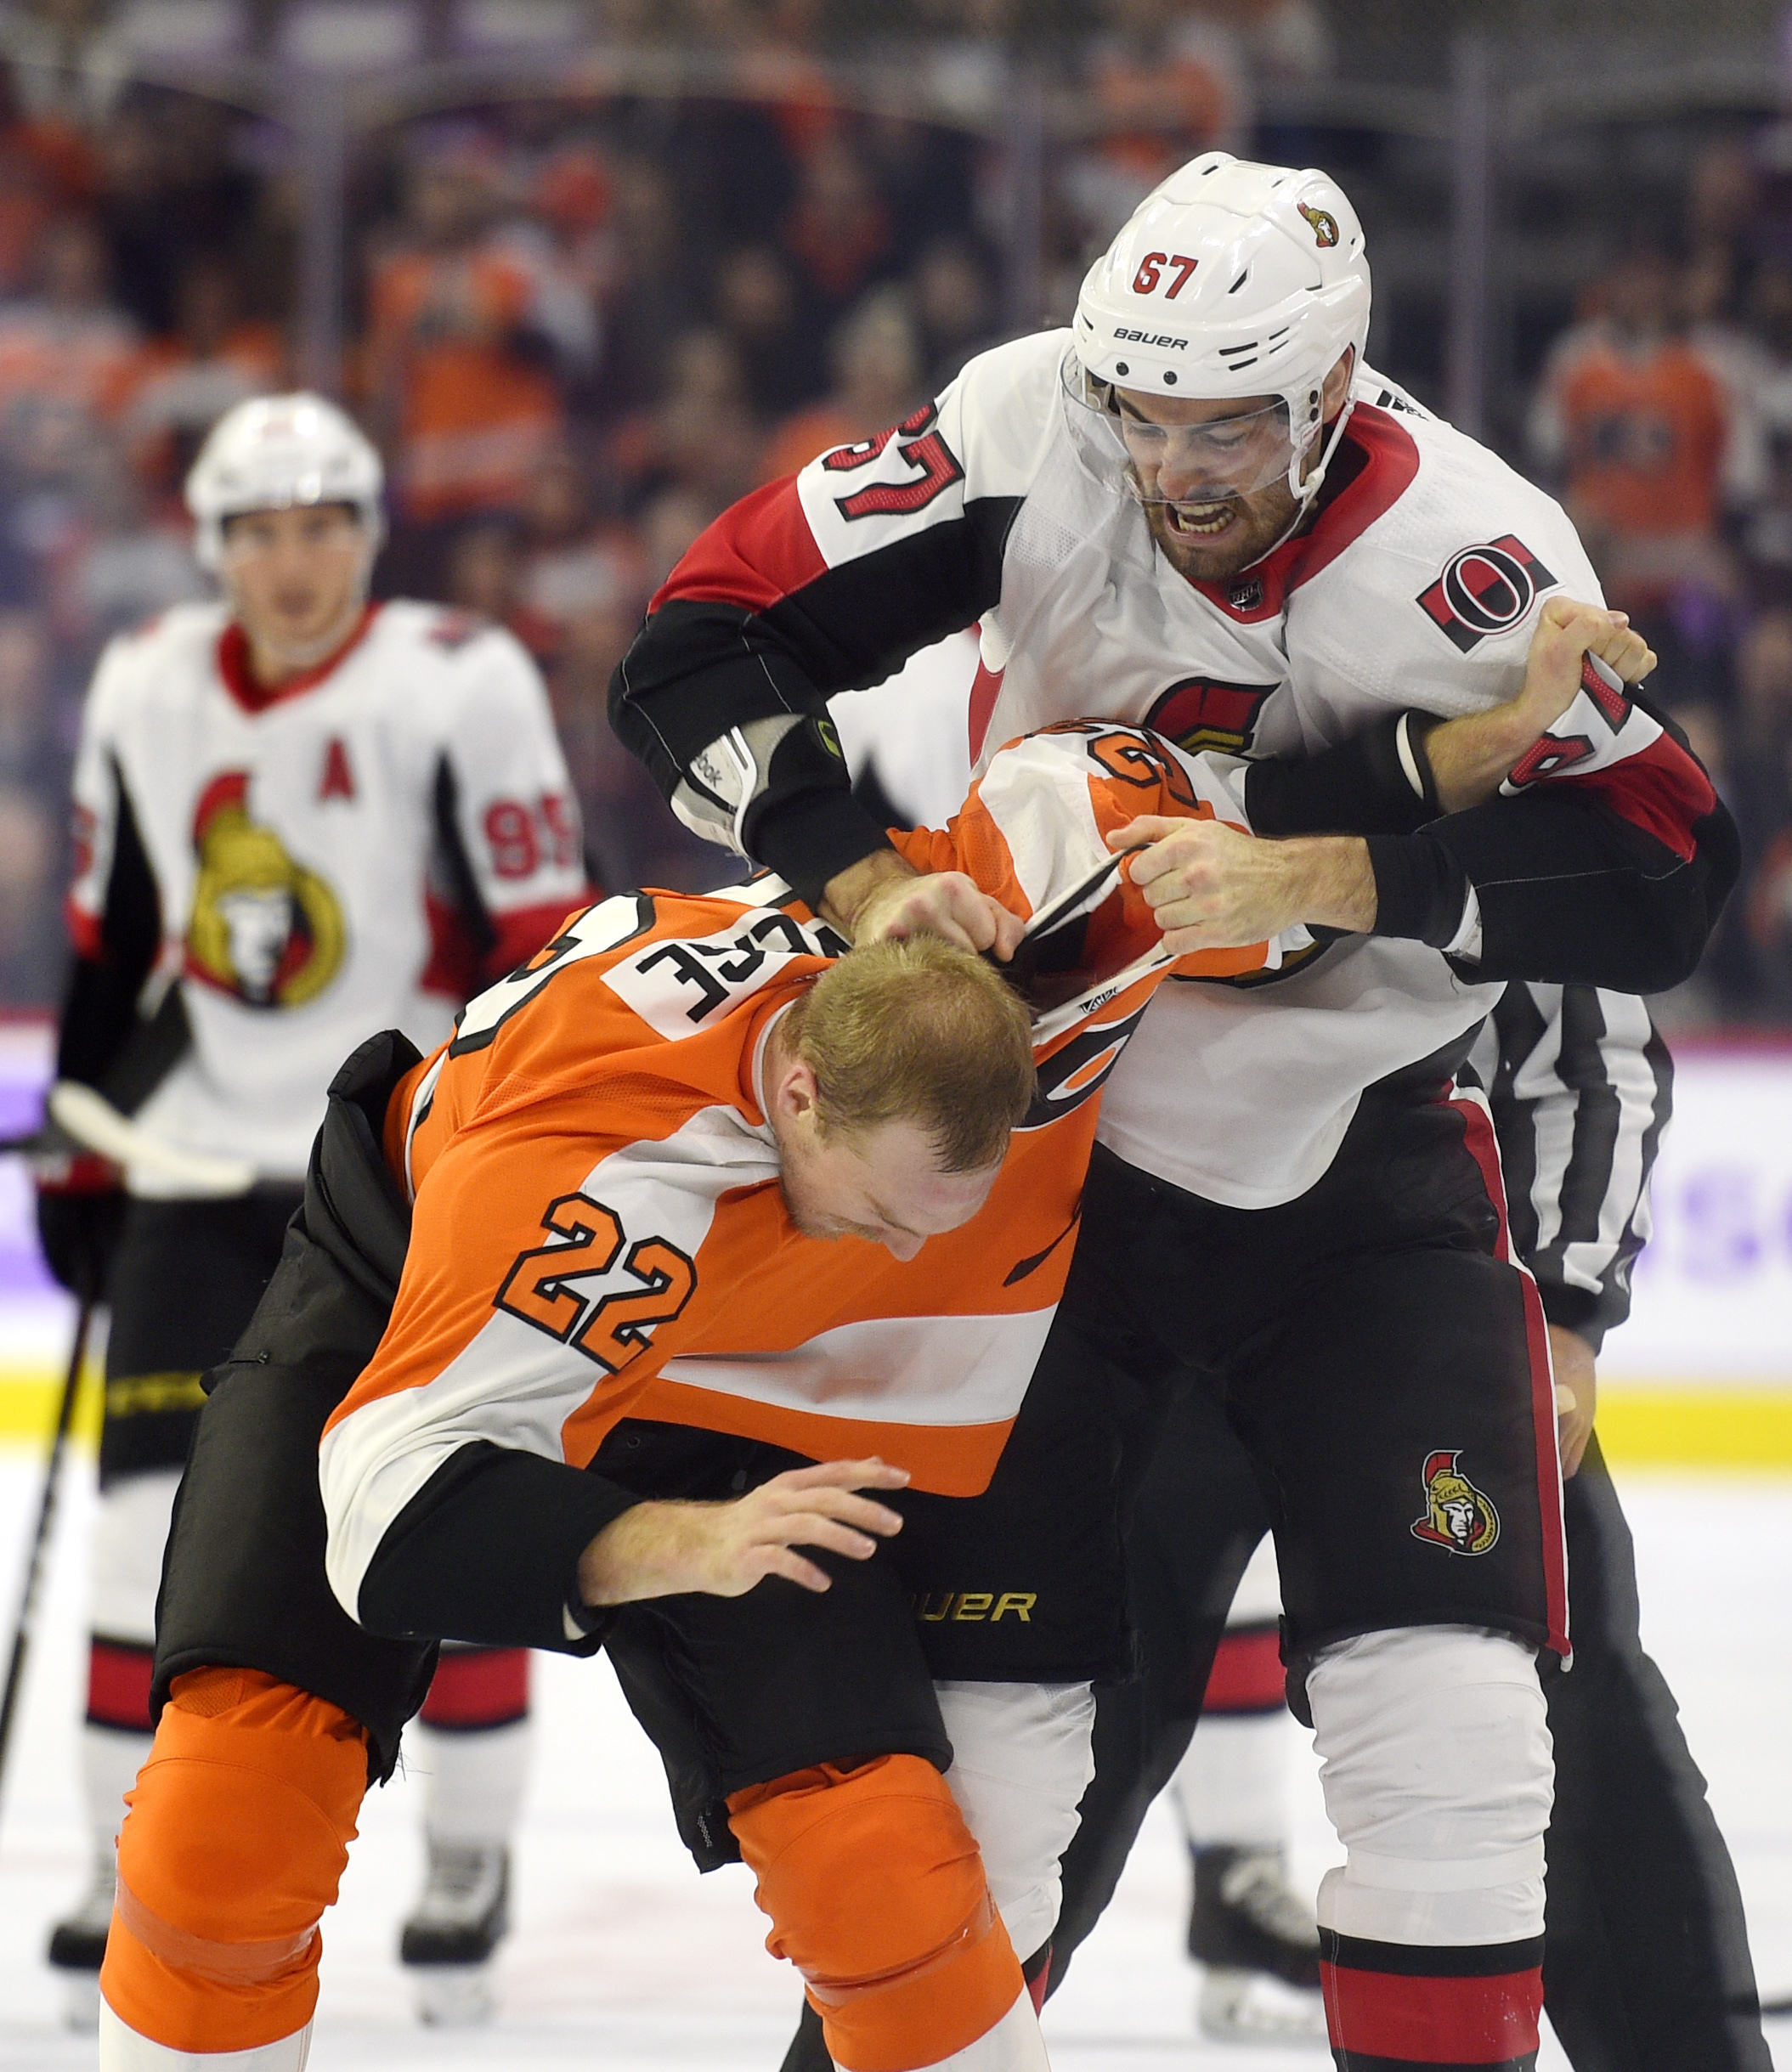 Senators stun Flyers with 3 goals in 3rd for 4-3 victory